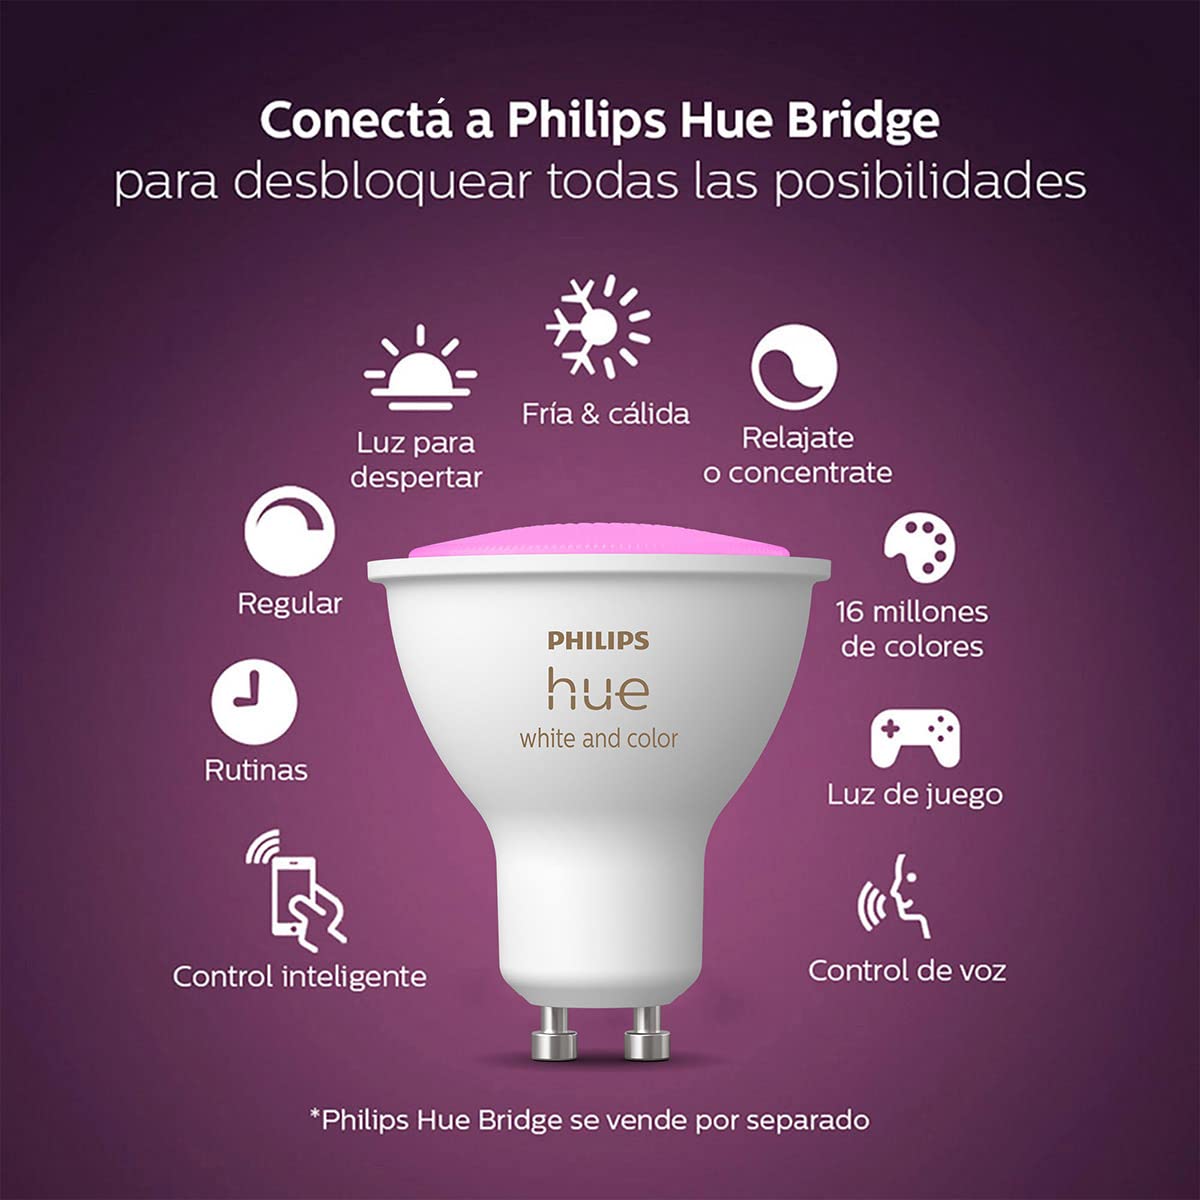 Philips Hue White & Color Ambiance LED Smart GU10 Bulb, Bluetooth & Zigbee Compatible (Hue Hub Optional), Voice Activated with Alexa, 1 Bulb